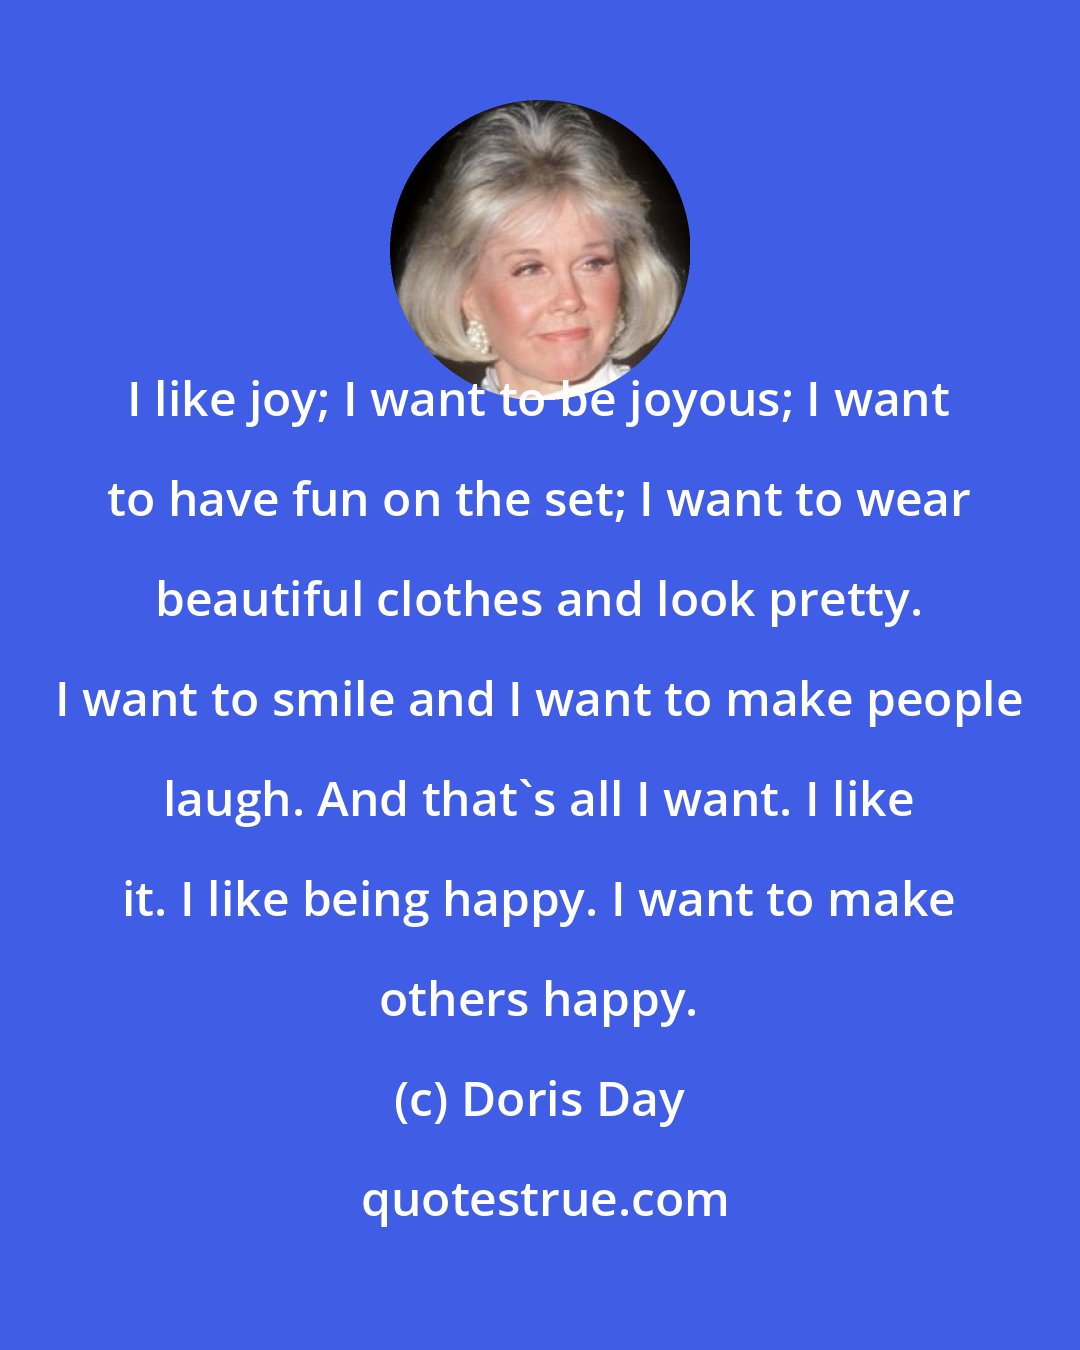 Doris Day: I like joy; I want to be joyous; I want to have fun on the set; I want to wear beautiful clothes and look pretty. I want to smile and I want to make people laugh. And that's all I want. I like it. I like being happy. I want to make others happy.